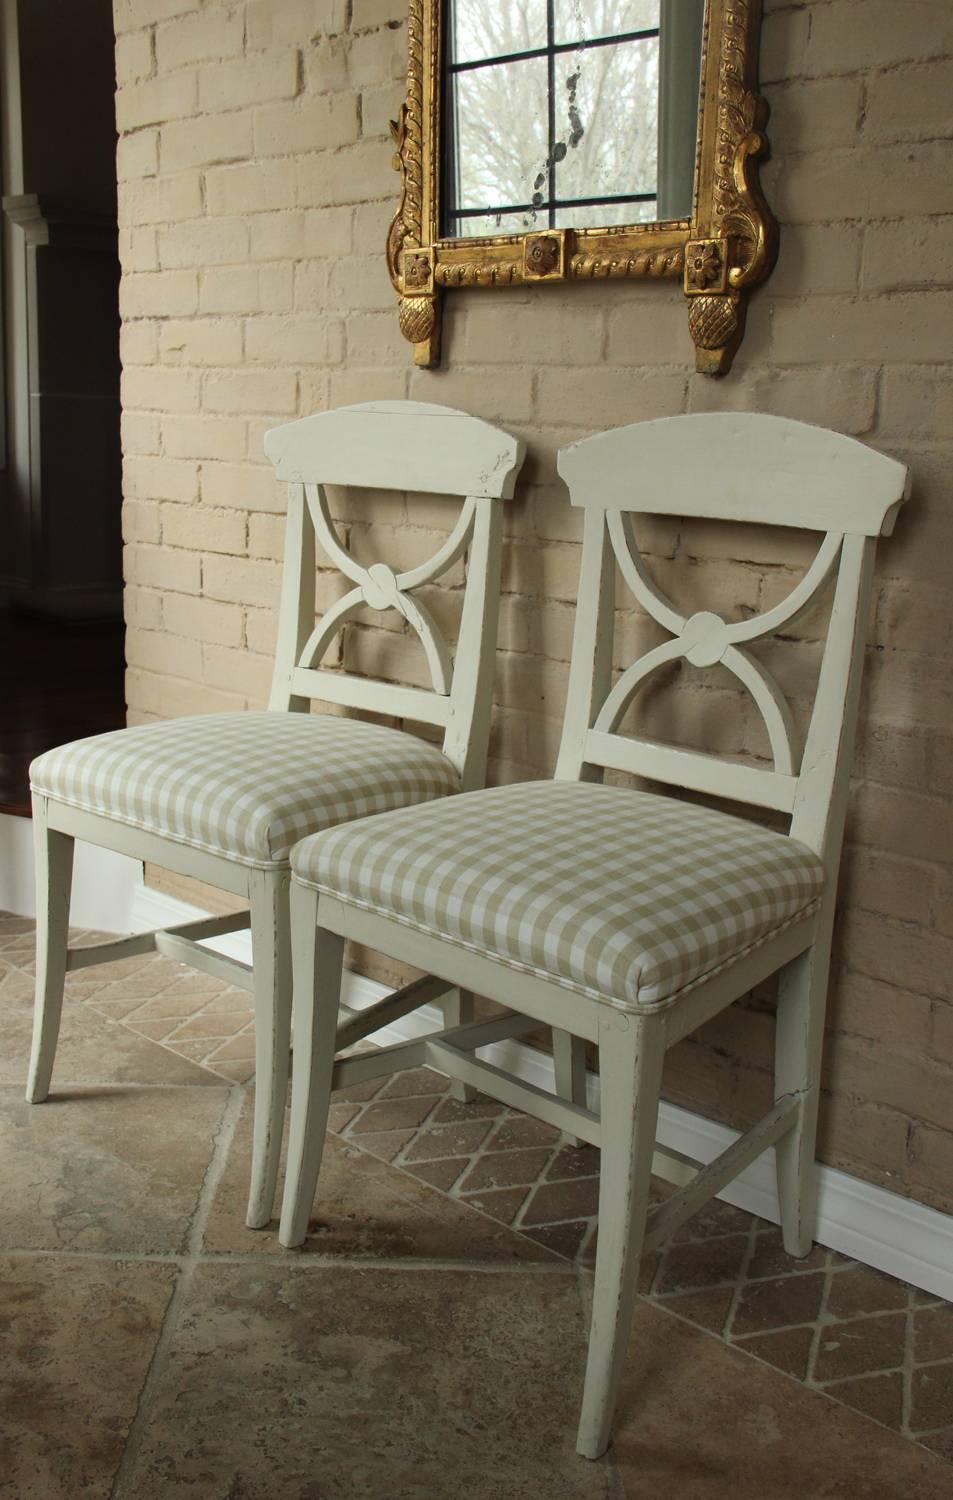 A pair of Swedish Gustavian style side chairs from the mid 19th century, newly upholstered in a beautiful Elizabeth Eakins linen check.